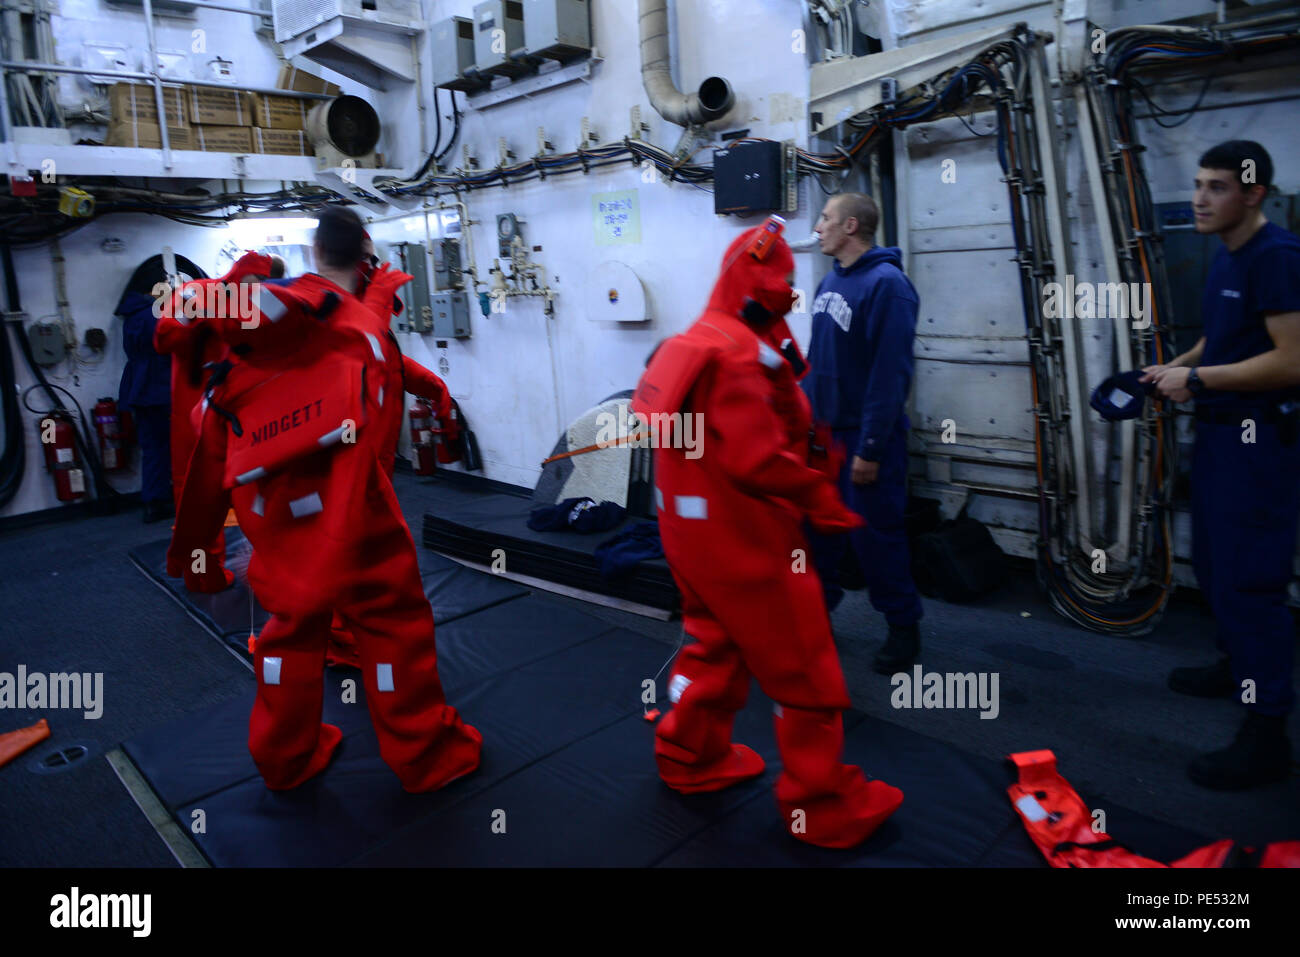 Crew members aboard the Coast Guard Cutter Midgett, a 378-foot high-endurance cutter homeported in Seattle, put on immersion suits during underway training, Oct. 9, 2015. Immersion suits are suits that crew members would put on in case they had to abandon ship. (U.S. Coast Guard photo by Petty Officer 1st Class Levi Read Stock Photo